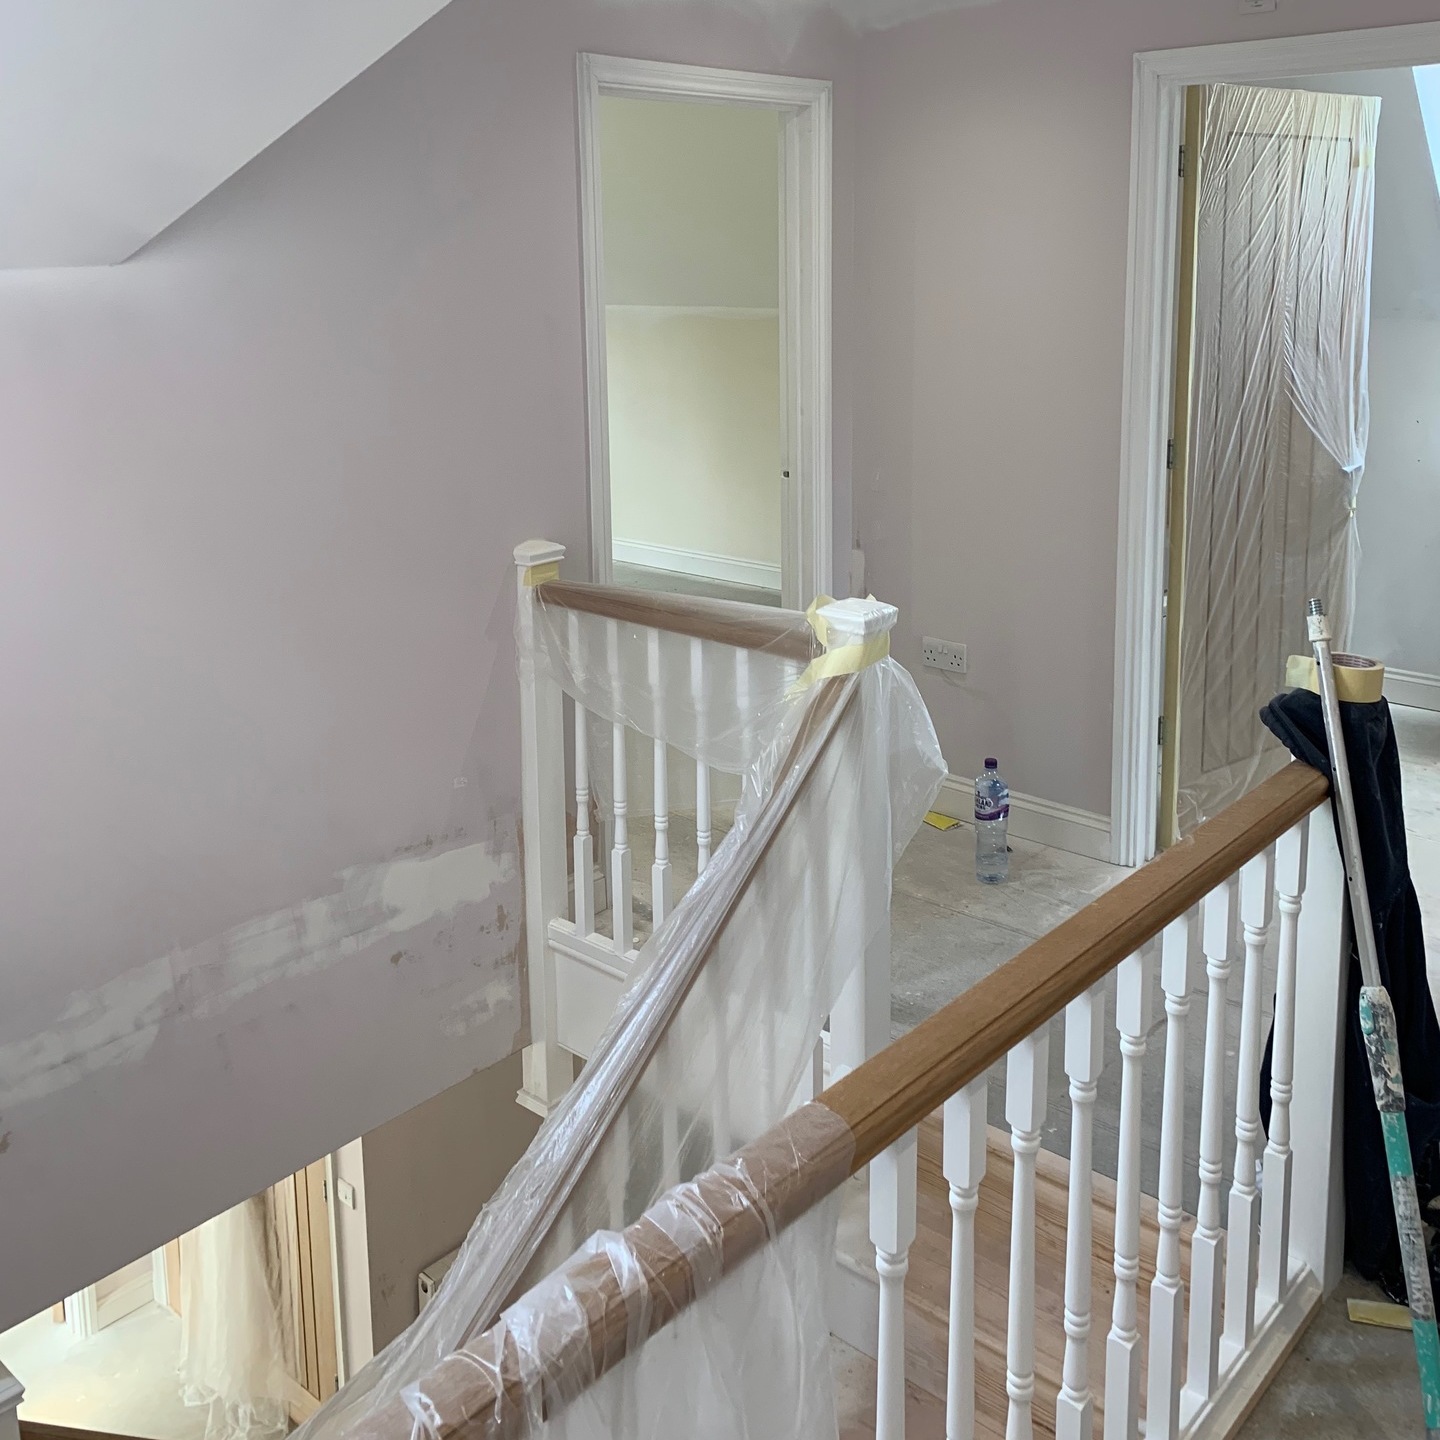 Residential painting and decorating